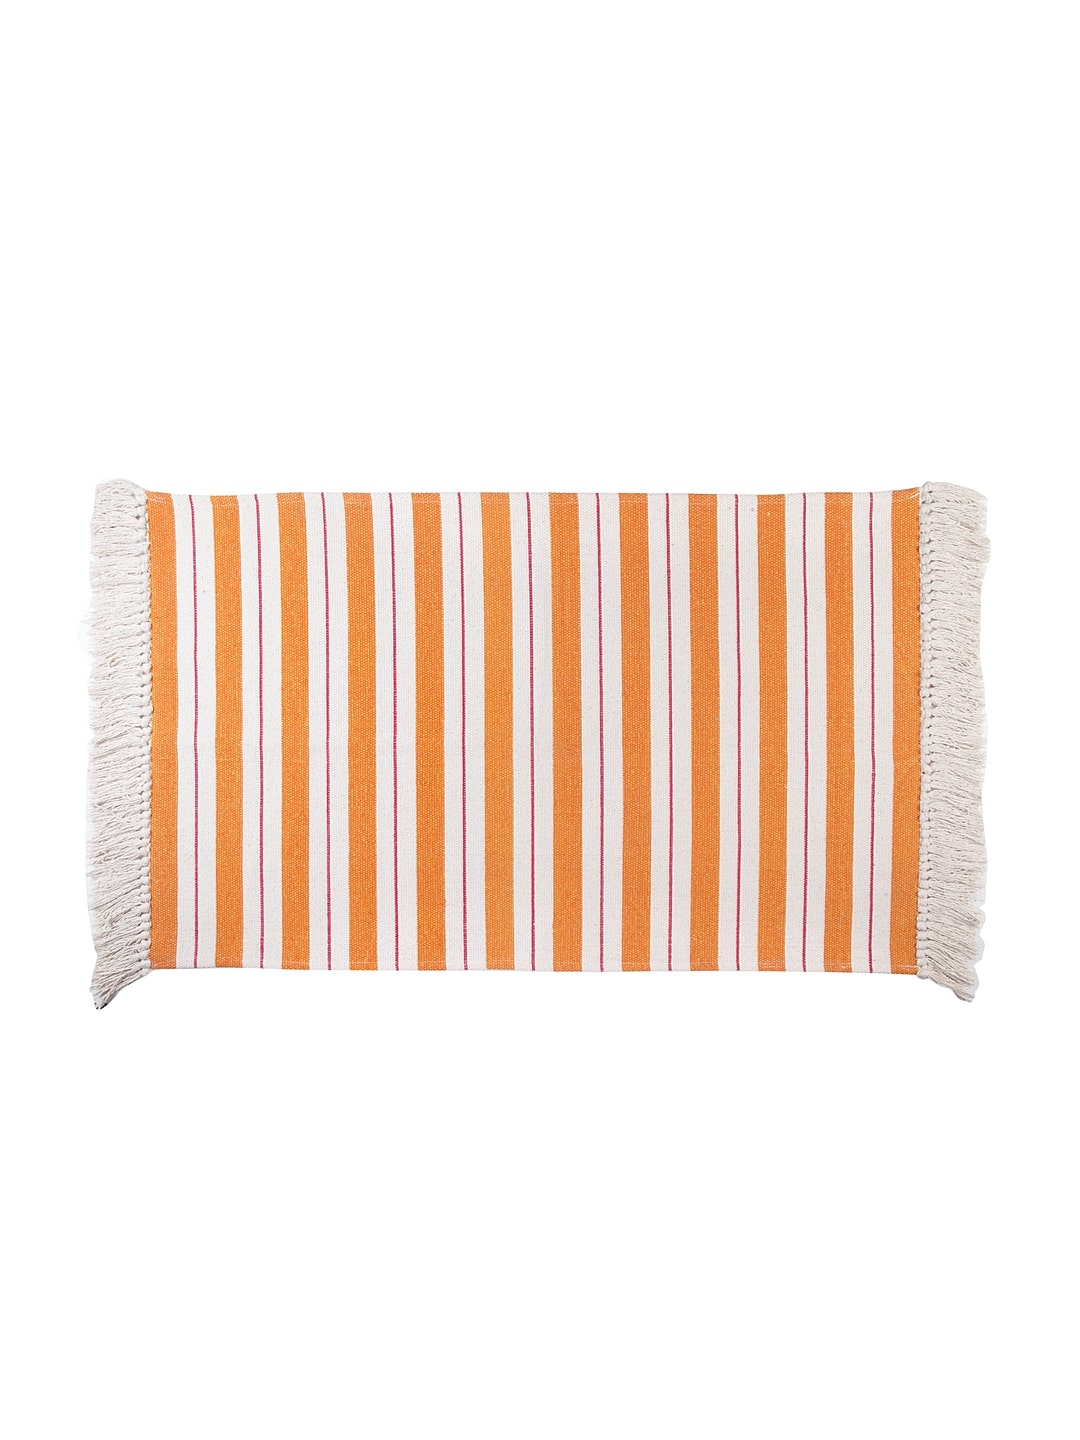 Blanc9 Dyed Woven Striped Rug